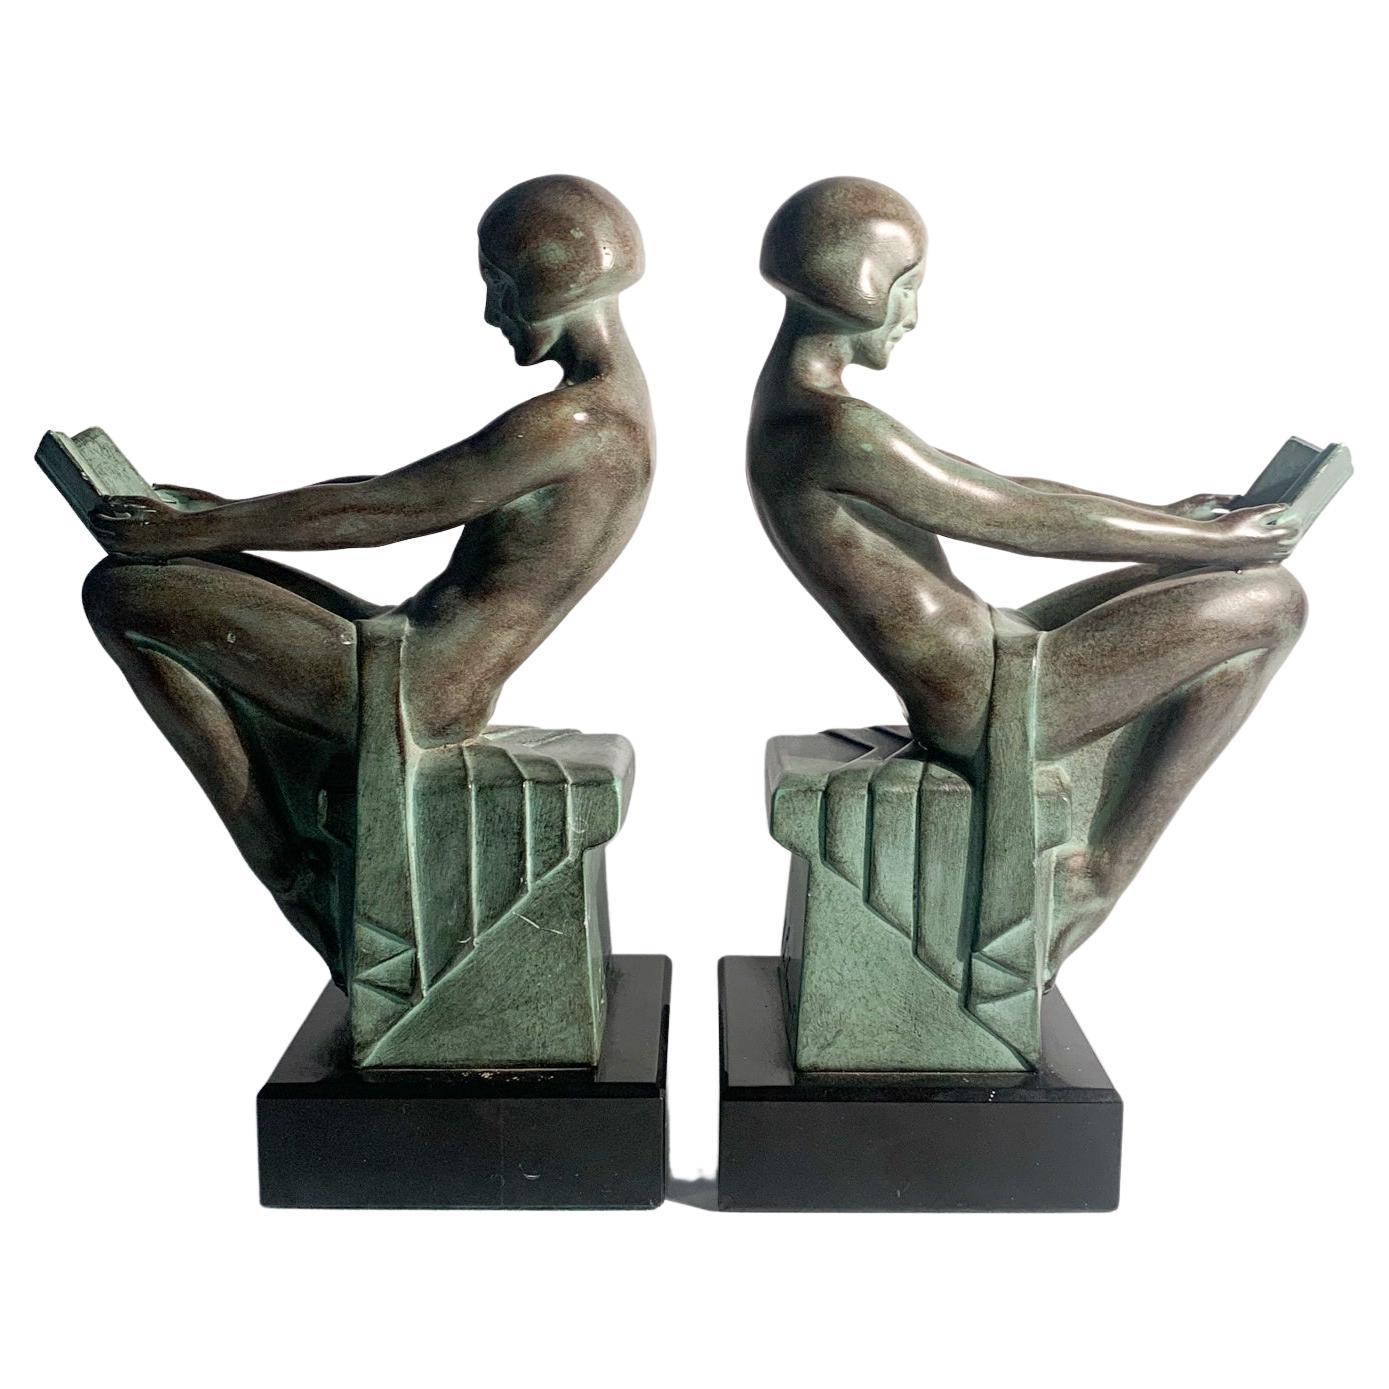 Pair Art Deco Bookends in Artistic Metal by Max Le Verrier from the 1930s